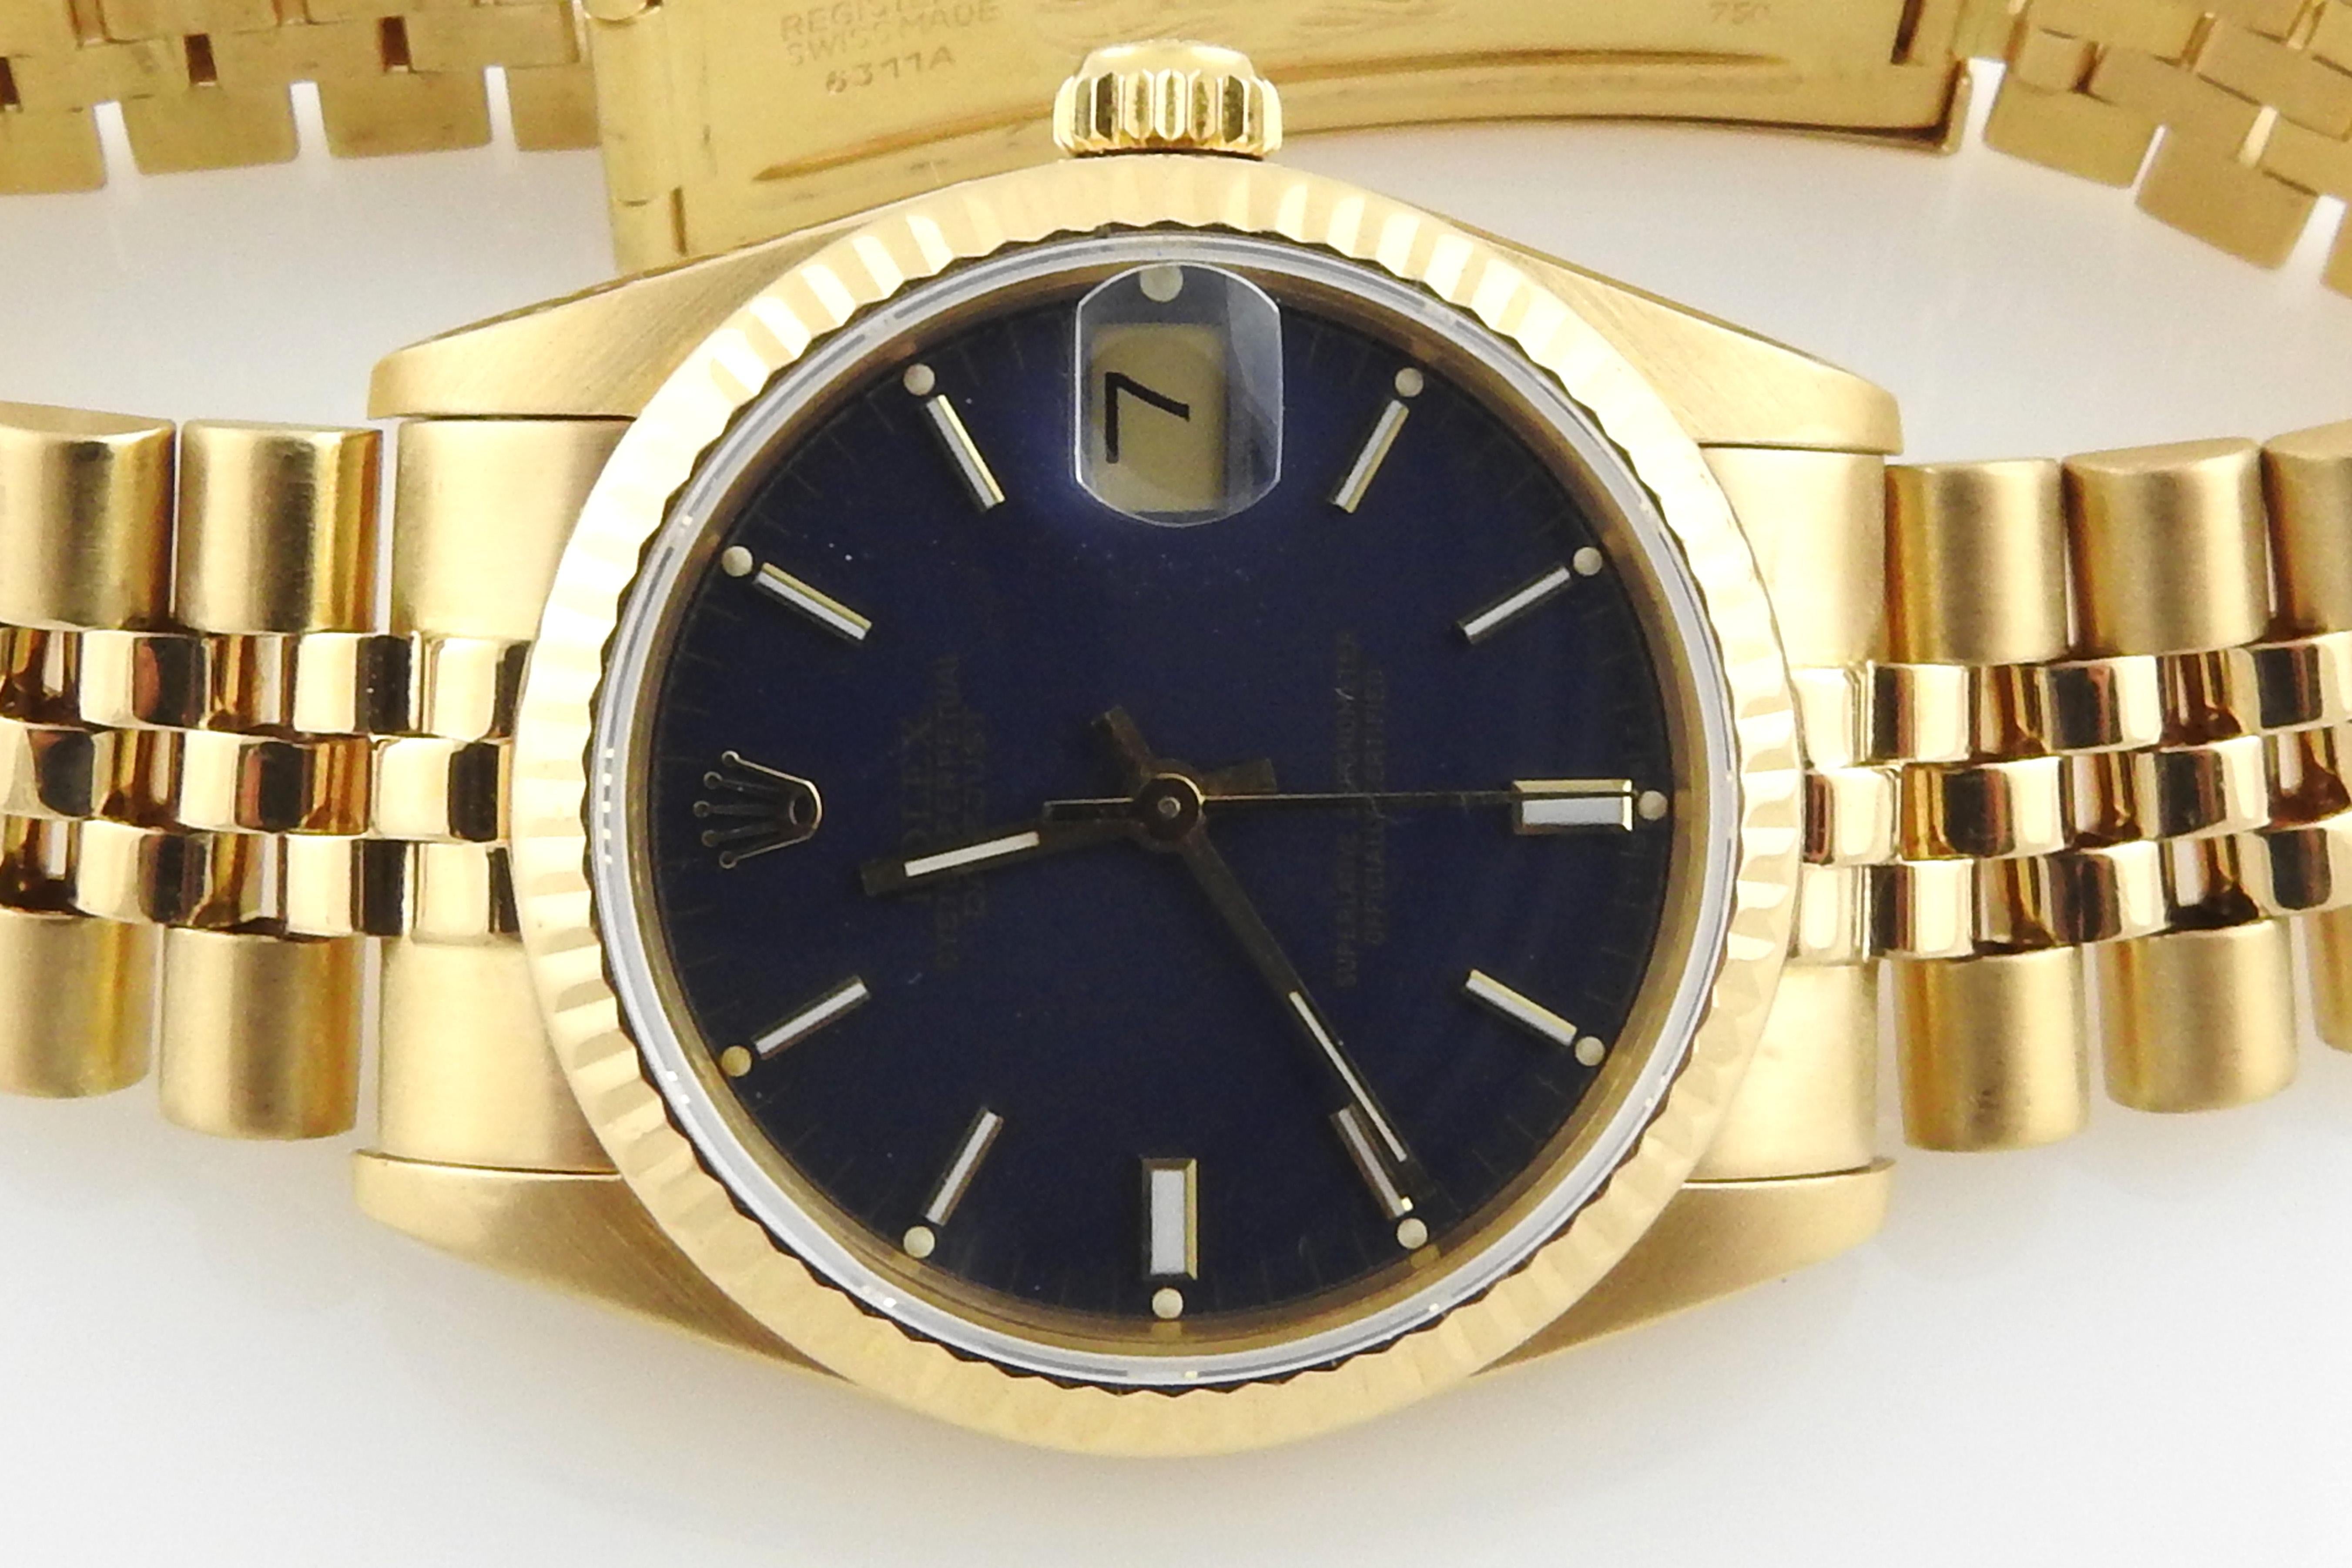 1987 Rolex Midsize 18K Yellow Gold Watch

Model: 68278
Serial: 9743759

Automatic movement

Blue Stick Dial

18K yellow gold case and jubilee band

Band has some stretch as shown. Fits up to 8